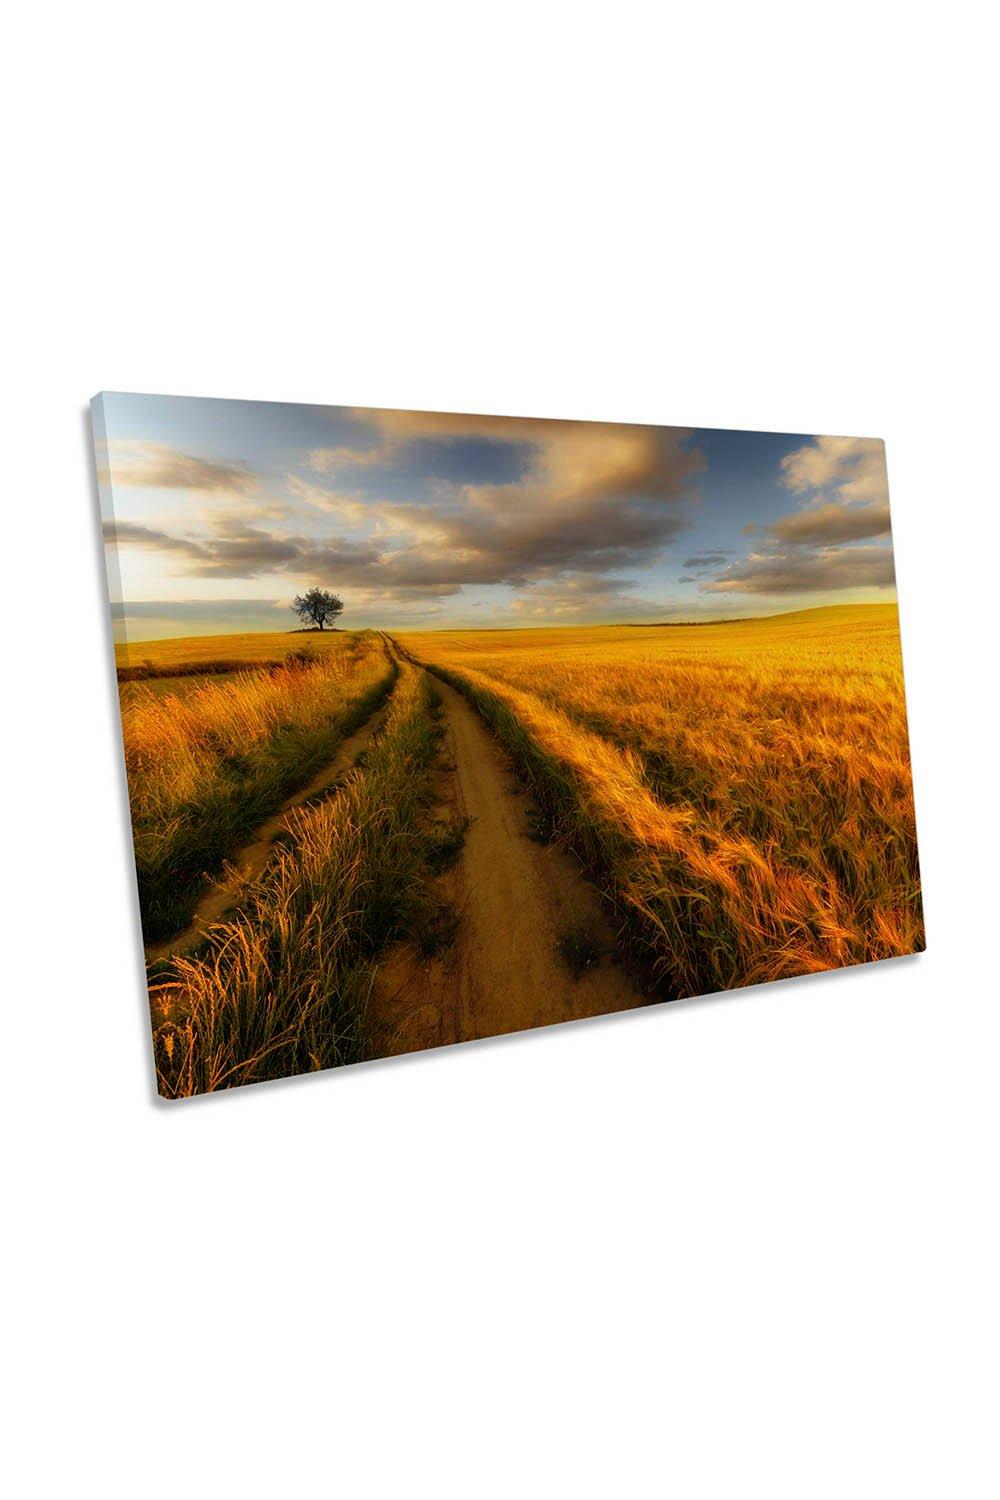 Lonely Tree Landscape Fields Canvas Wall Art Picture Print